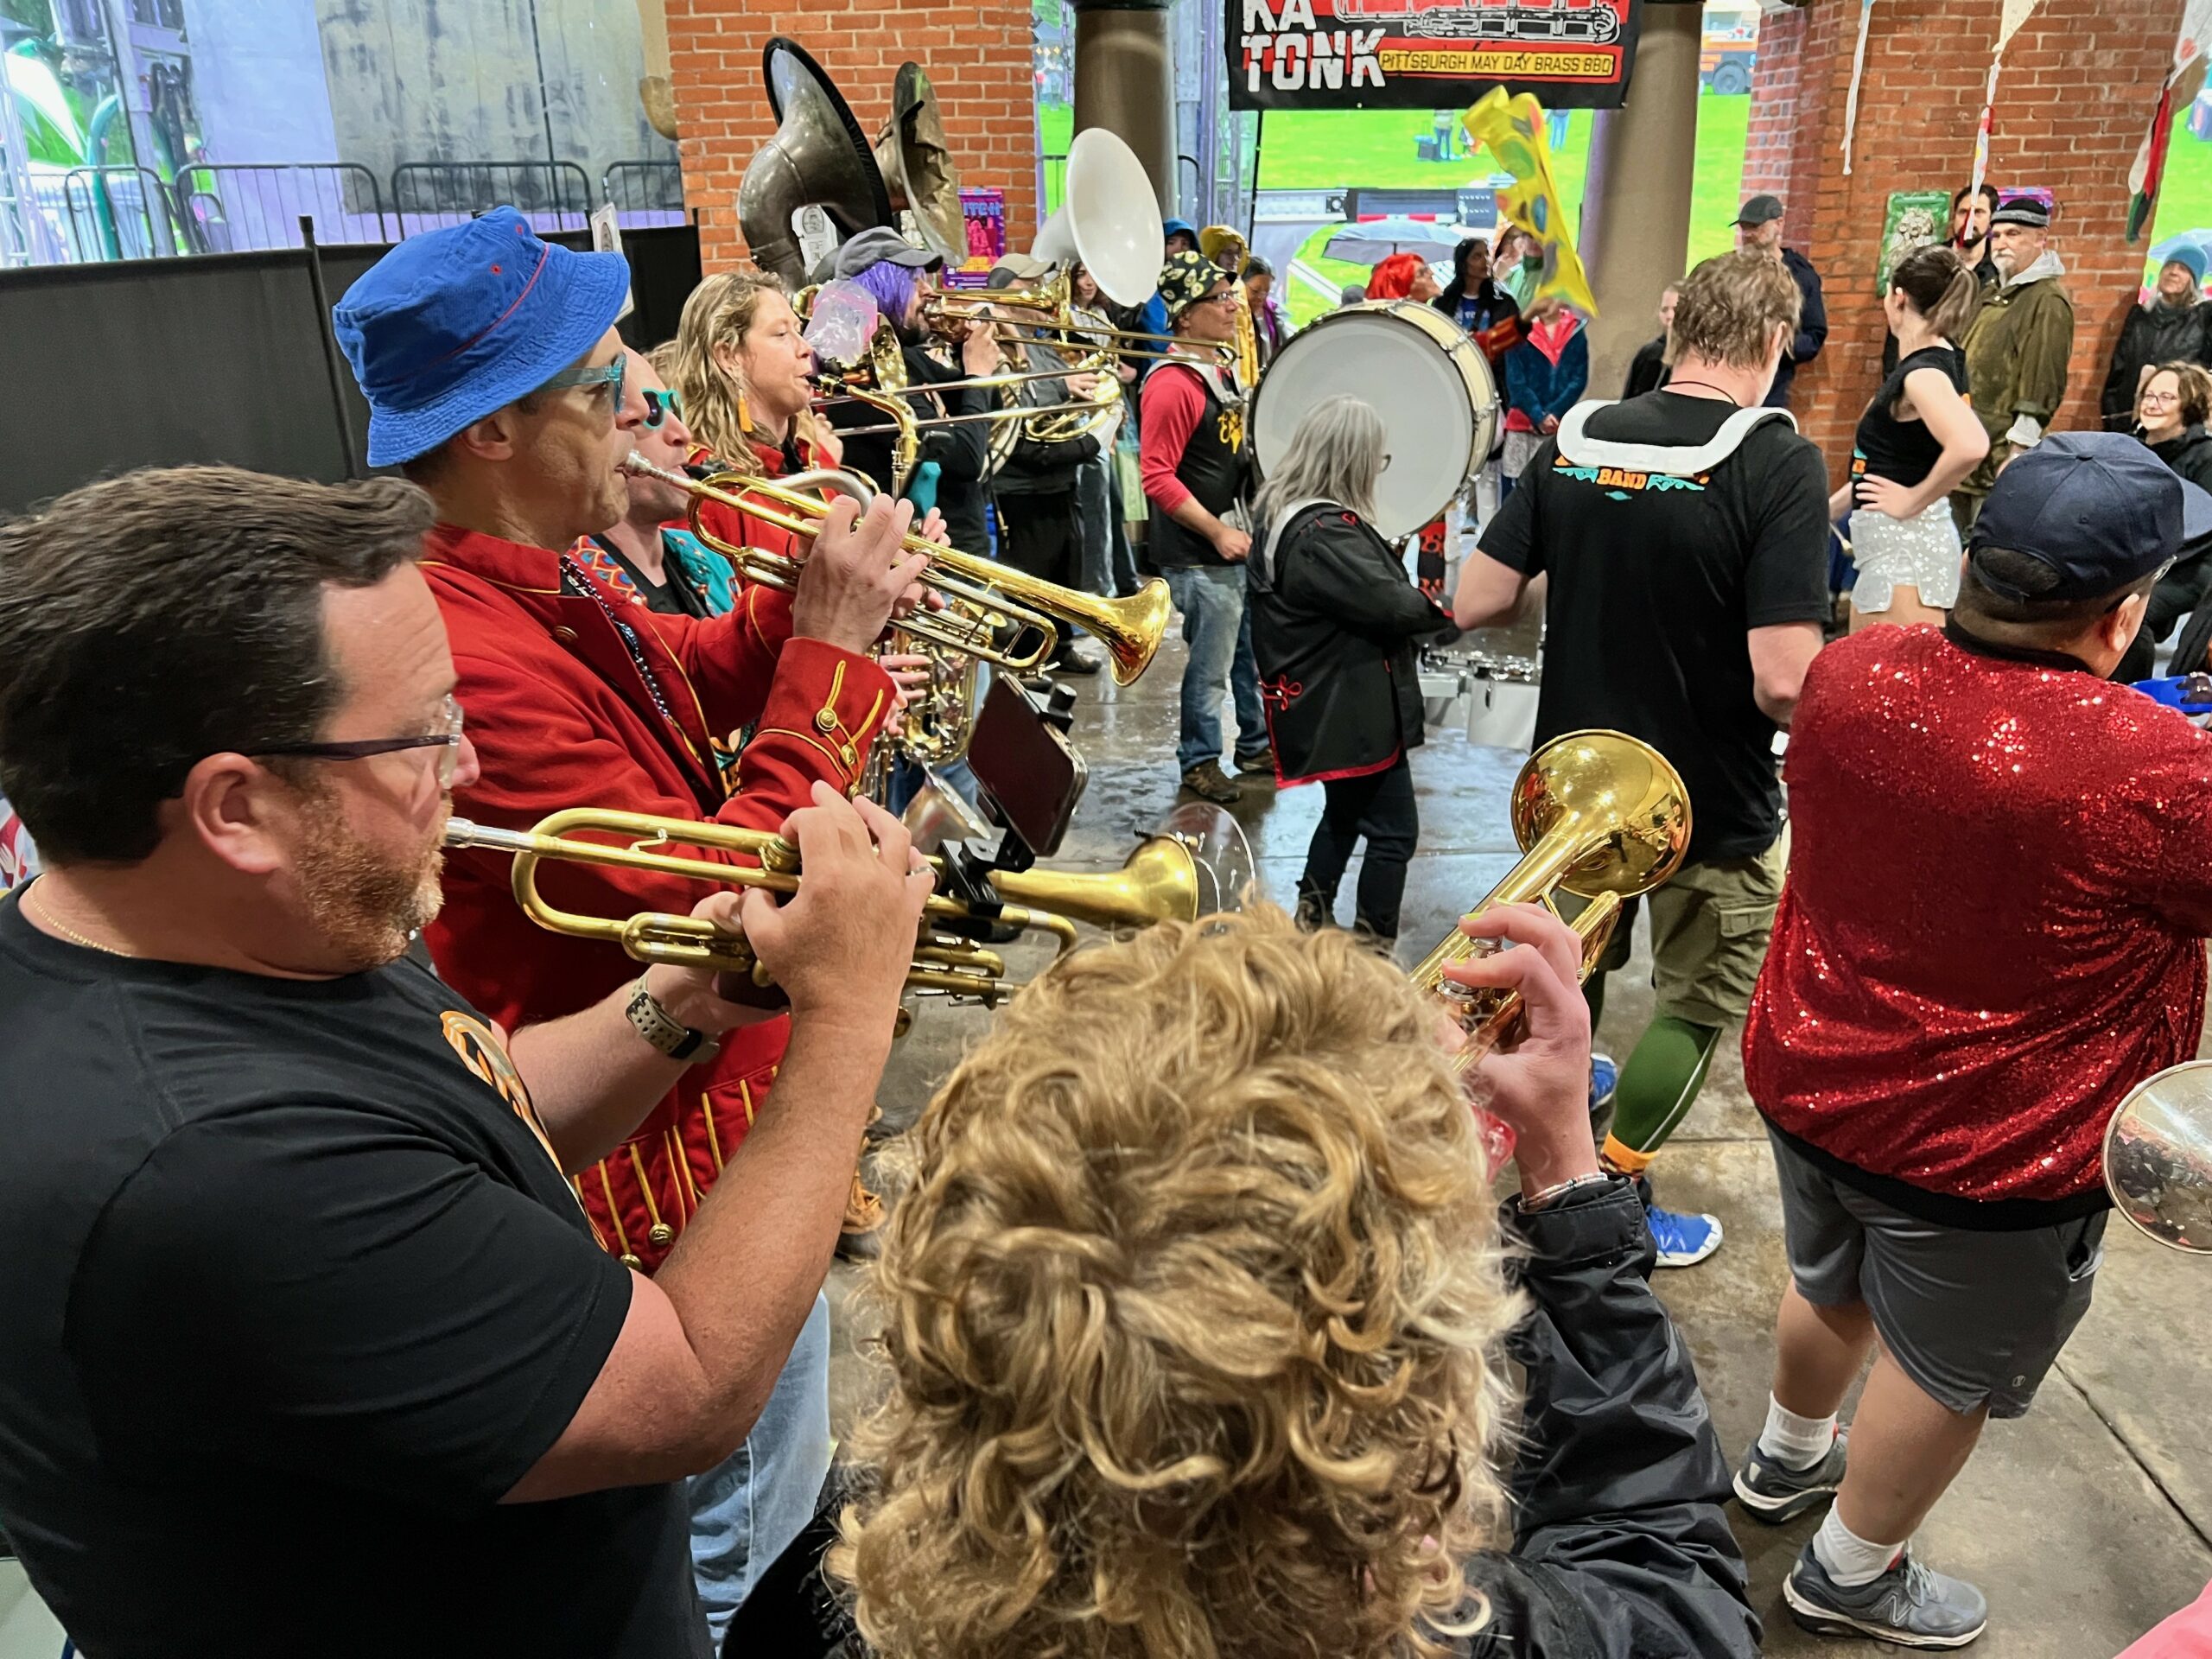 Performers play on with enthusiasm despite a damp Pittonkatonk – Pittsburgh Union Progress